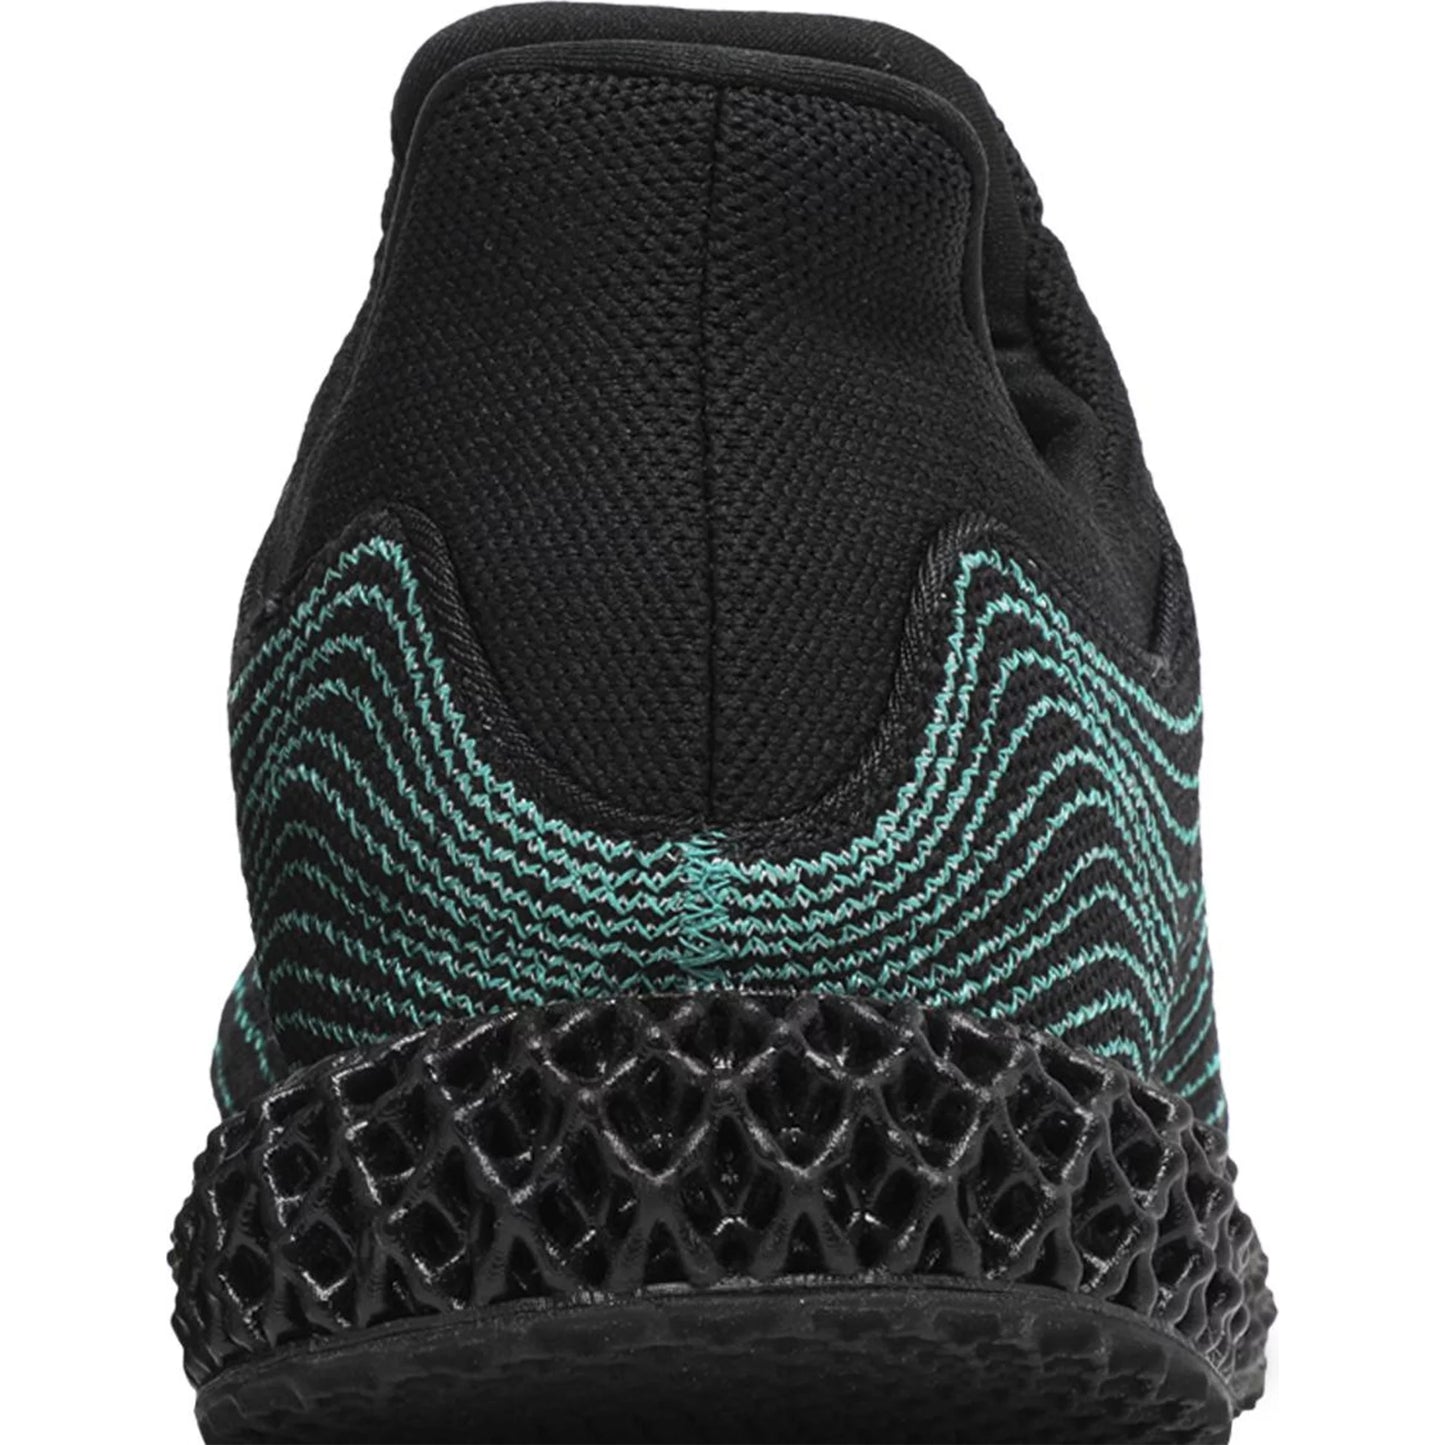 adidas Ultra Boost 4D Uncaged Parley Black